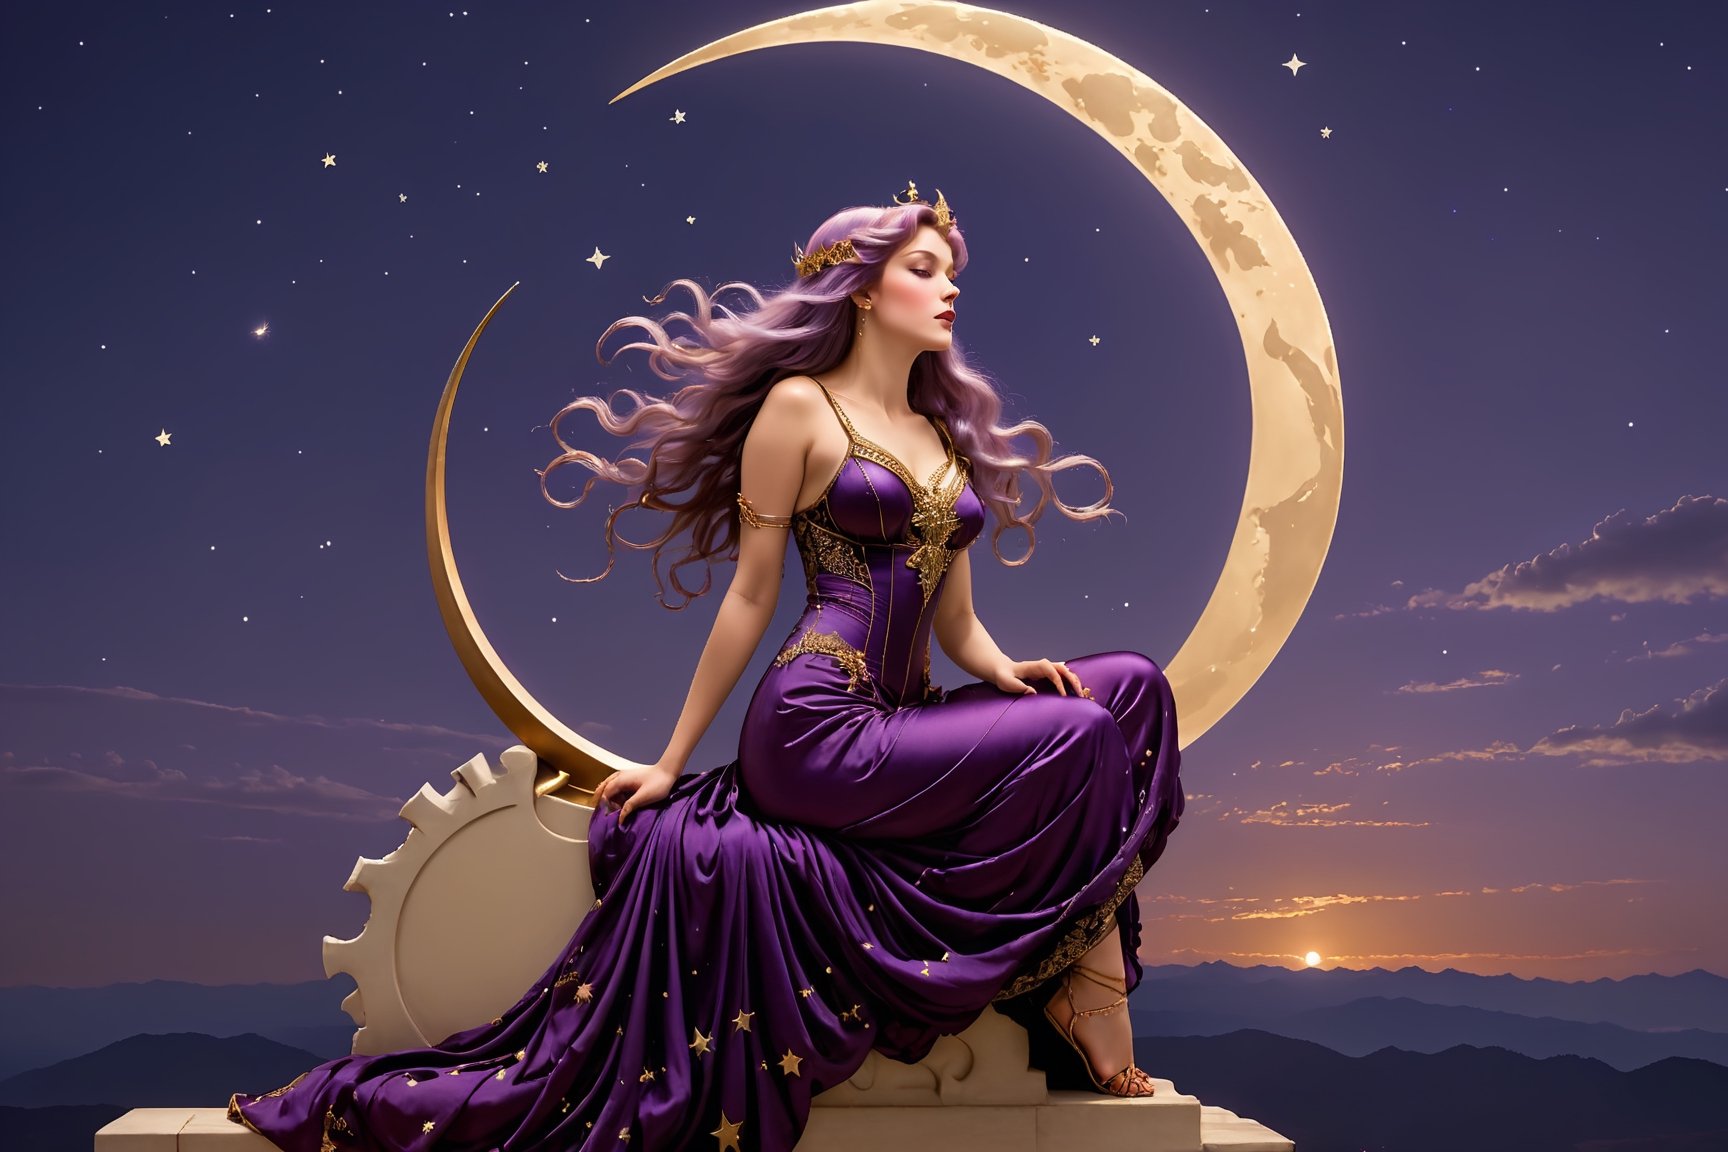 side view. full body shot, extreme long shot,  michael parkes style, pre-raphaelite, a beautiful young magical witch woman with long purple hair is sitting on a shiny golden crescent moon in the night sky. she is wearing an elaborate purple silk gown with intricate gold embroidery patterns. a gargoyle is flying near the moon and woman. stars are in the sky. glowing obs of various sizes are floating in the sky,  michael parkes, artist study hands. ,1girl,Masterpiece